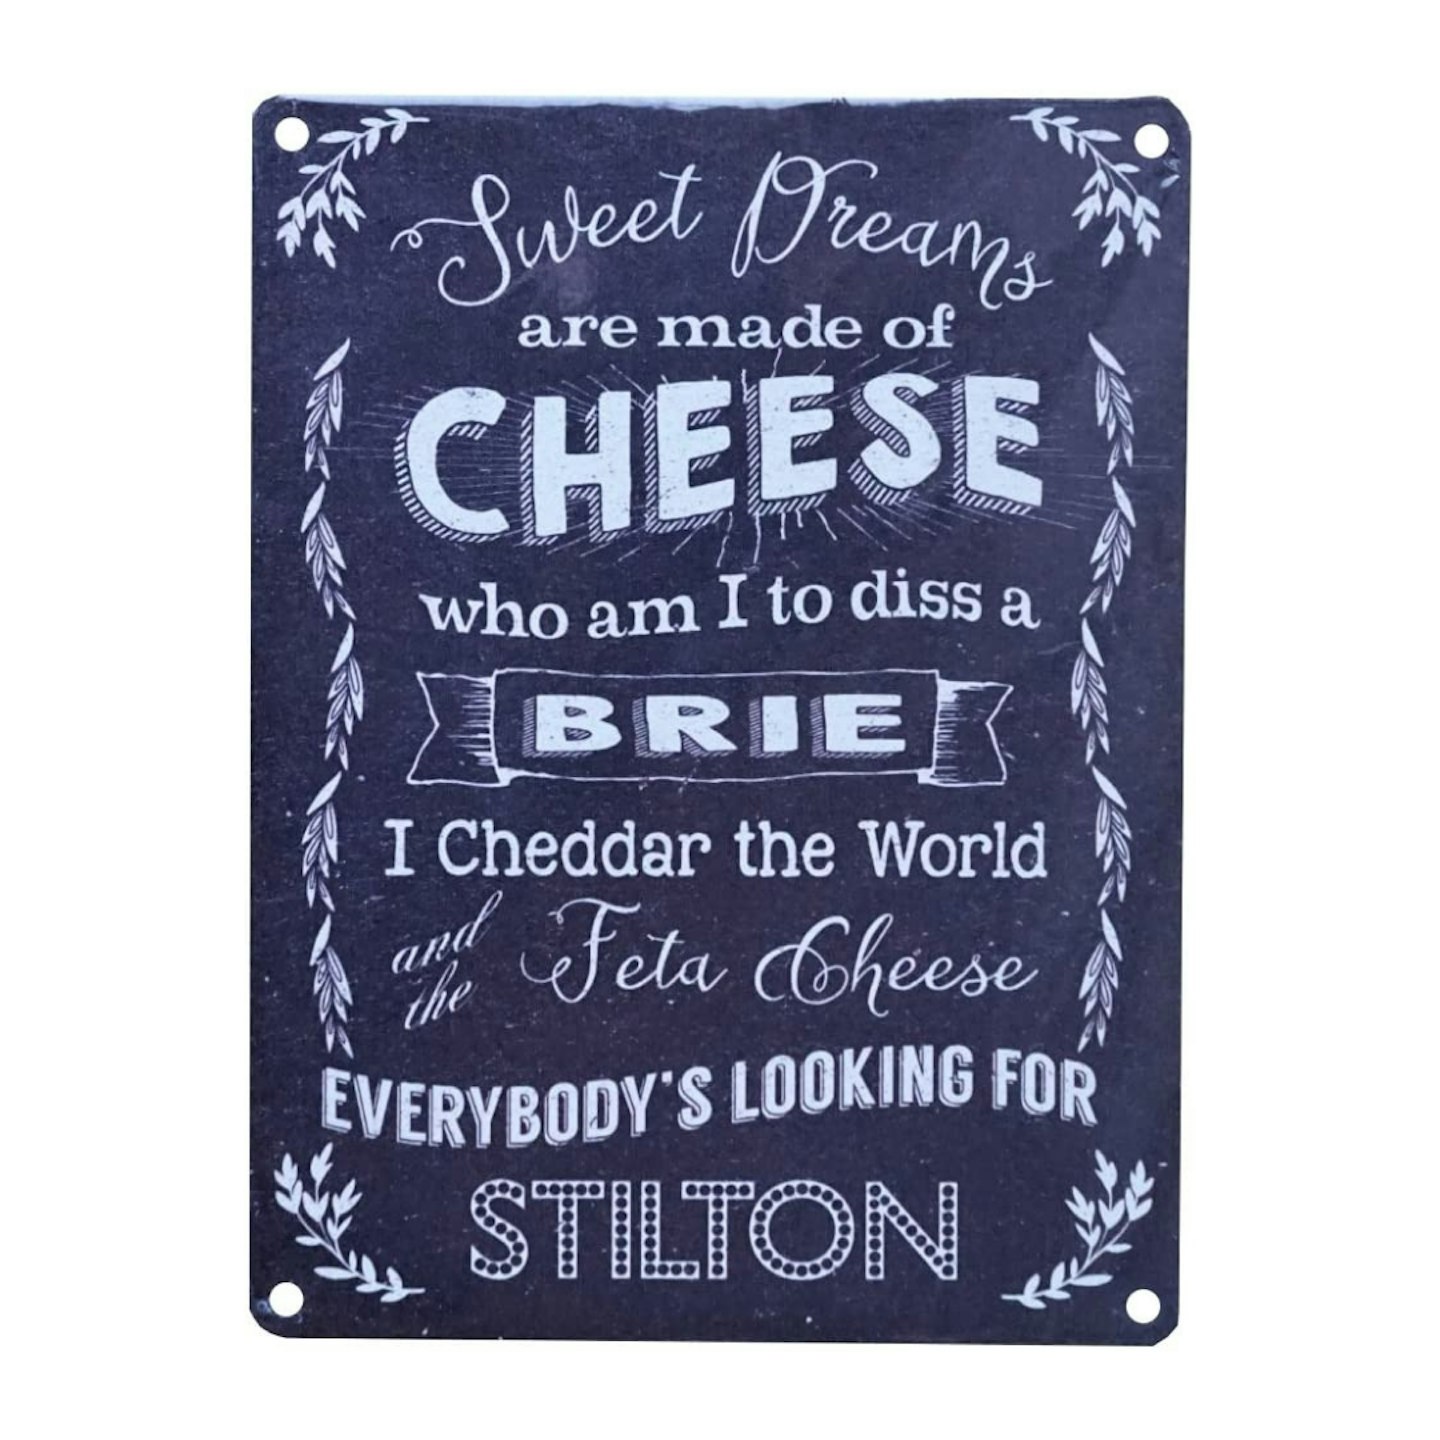 Vintage Style Cheese Metal Wall Plaque Sign